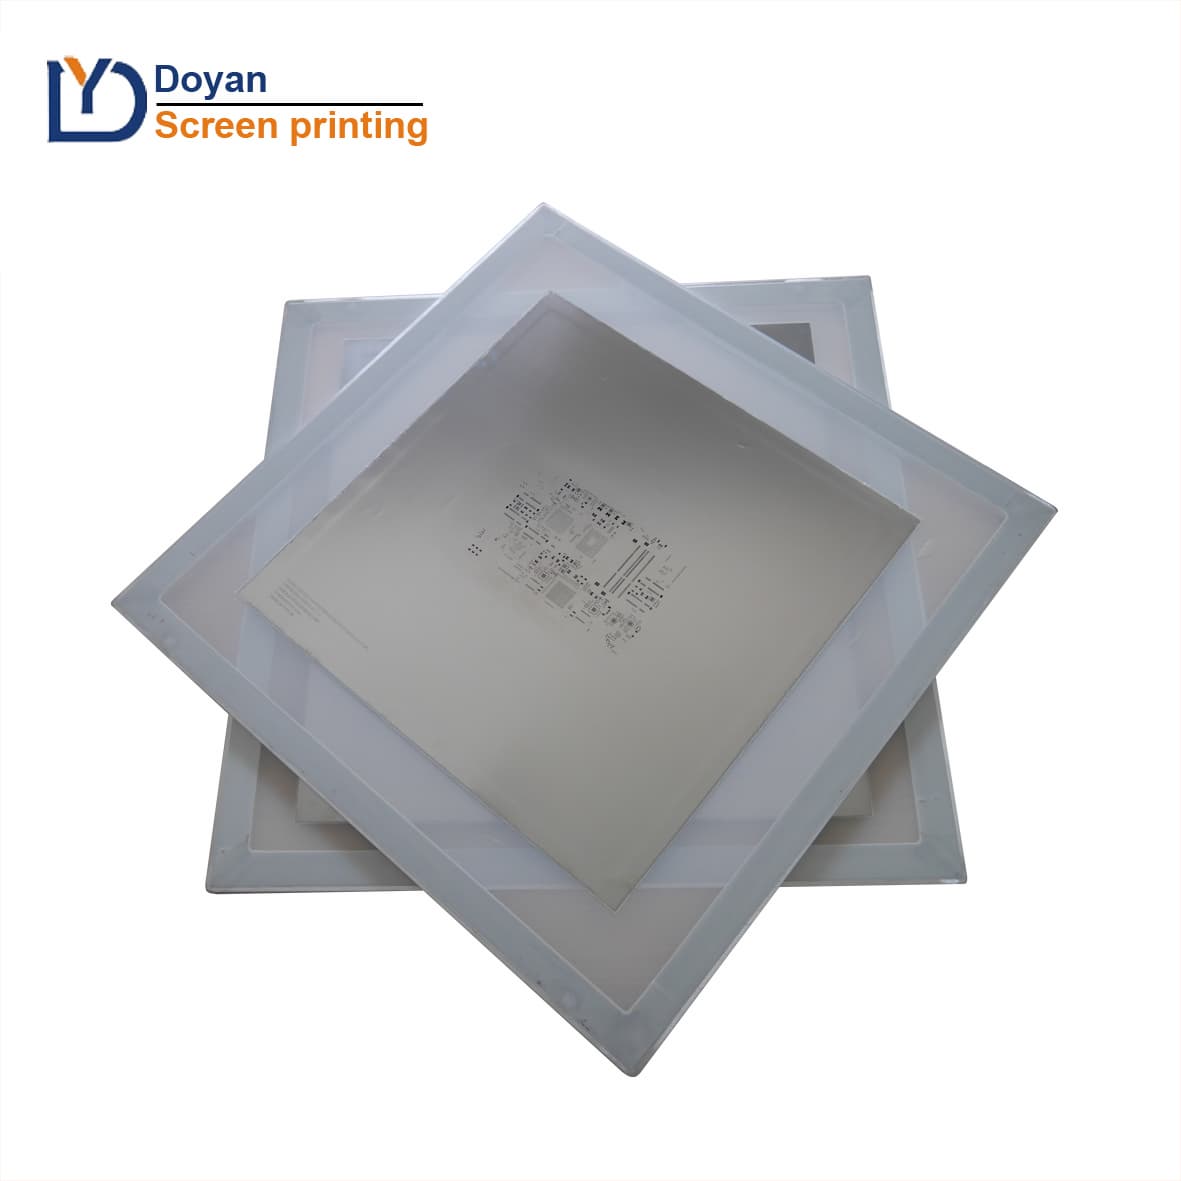 Aluminum frame for SMT printing with best price